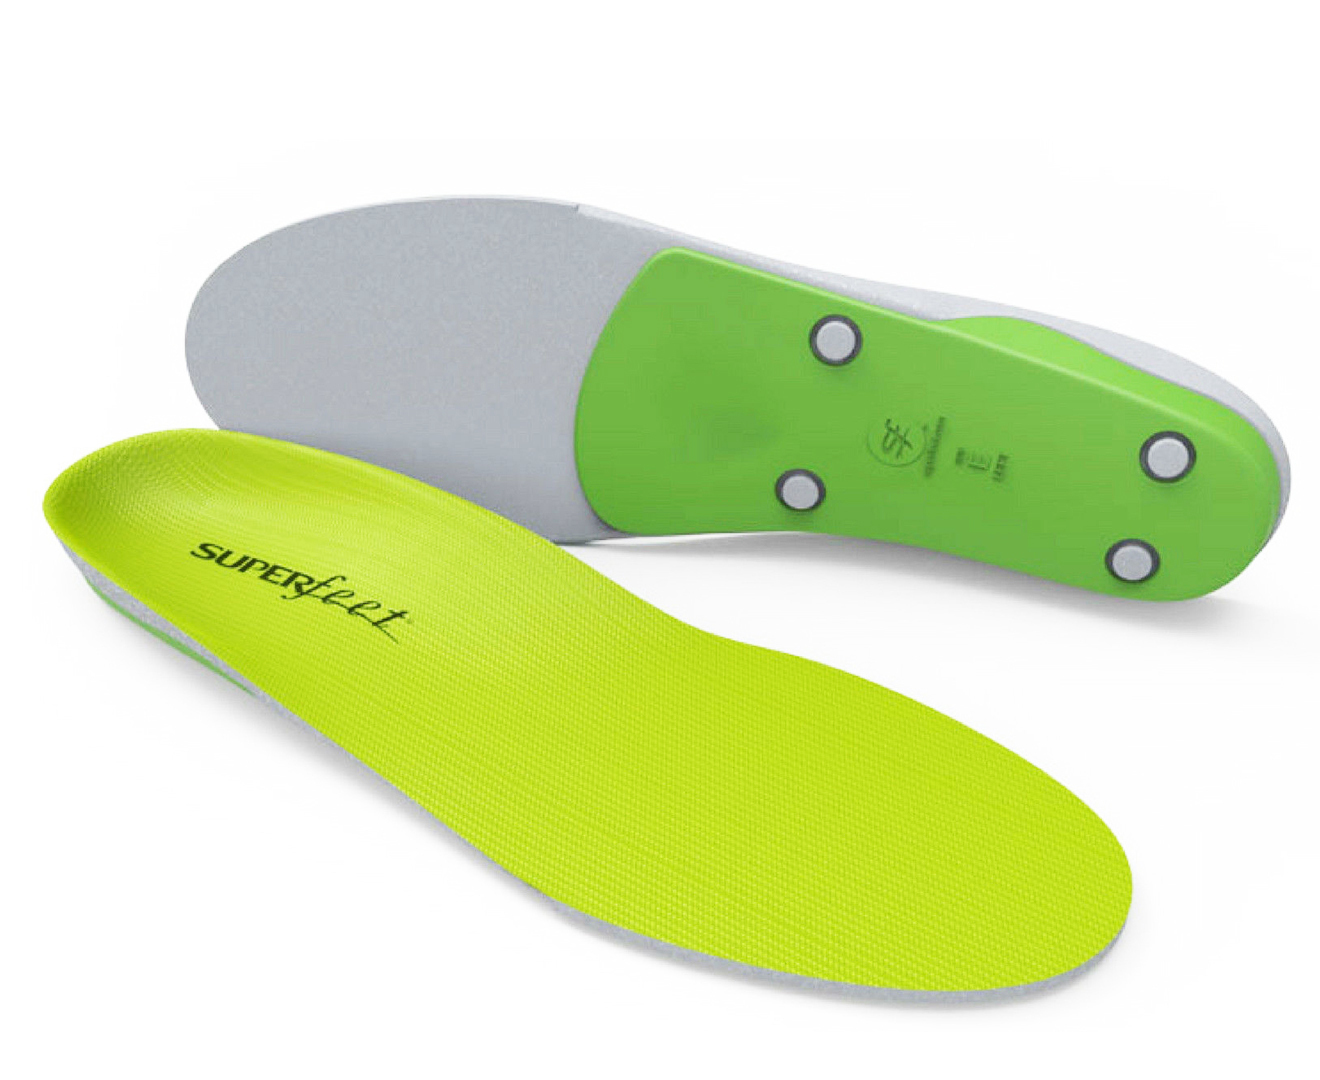 SUPERFEET,Insoles Inserts Orthotics Arch Support Cushion GREEN Support New